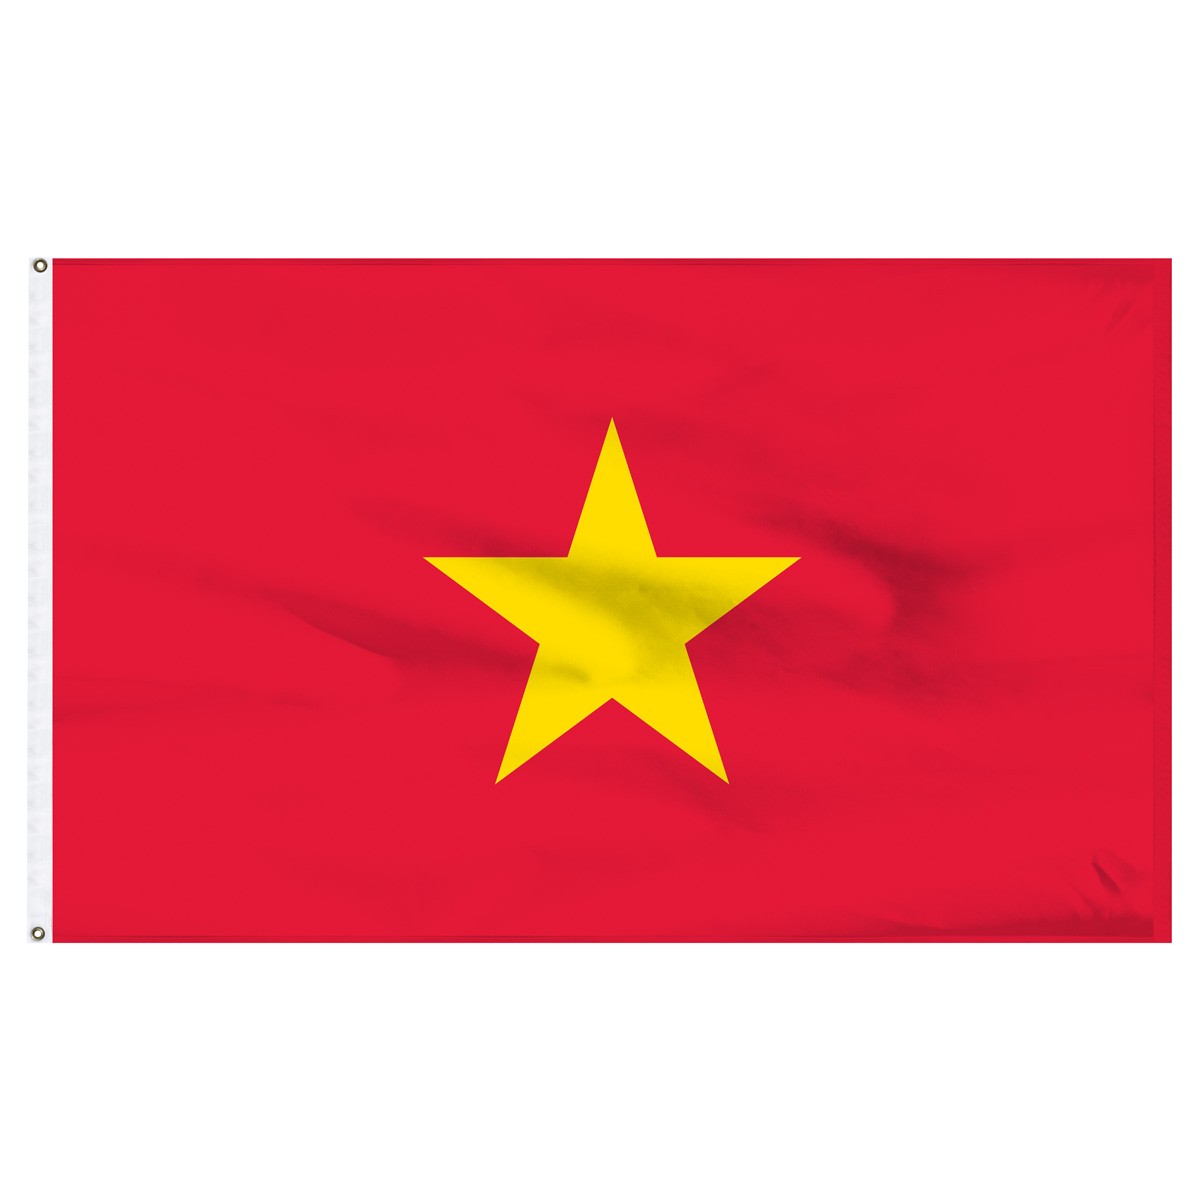 Vietnam Posters and Banners